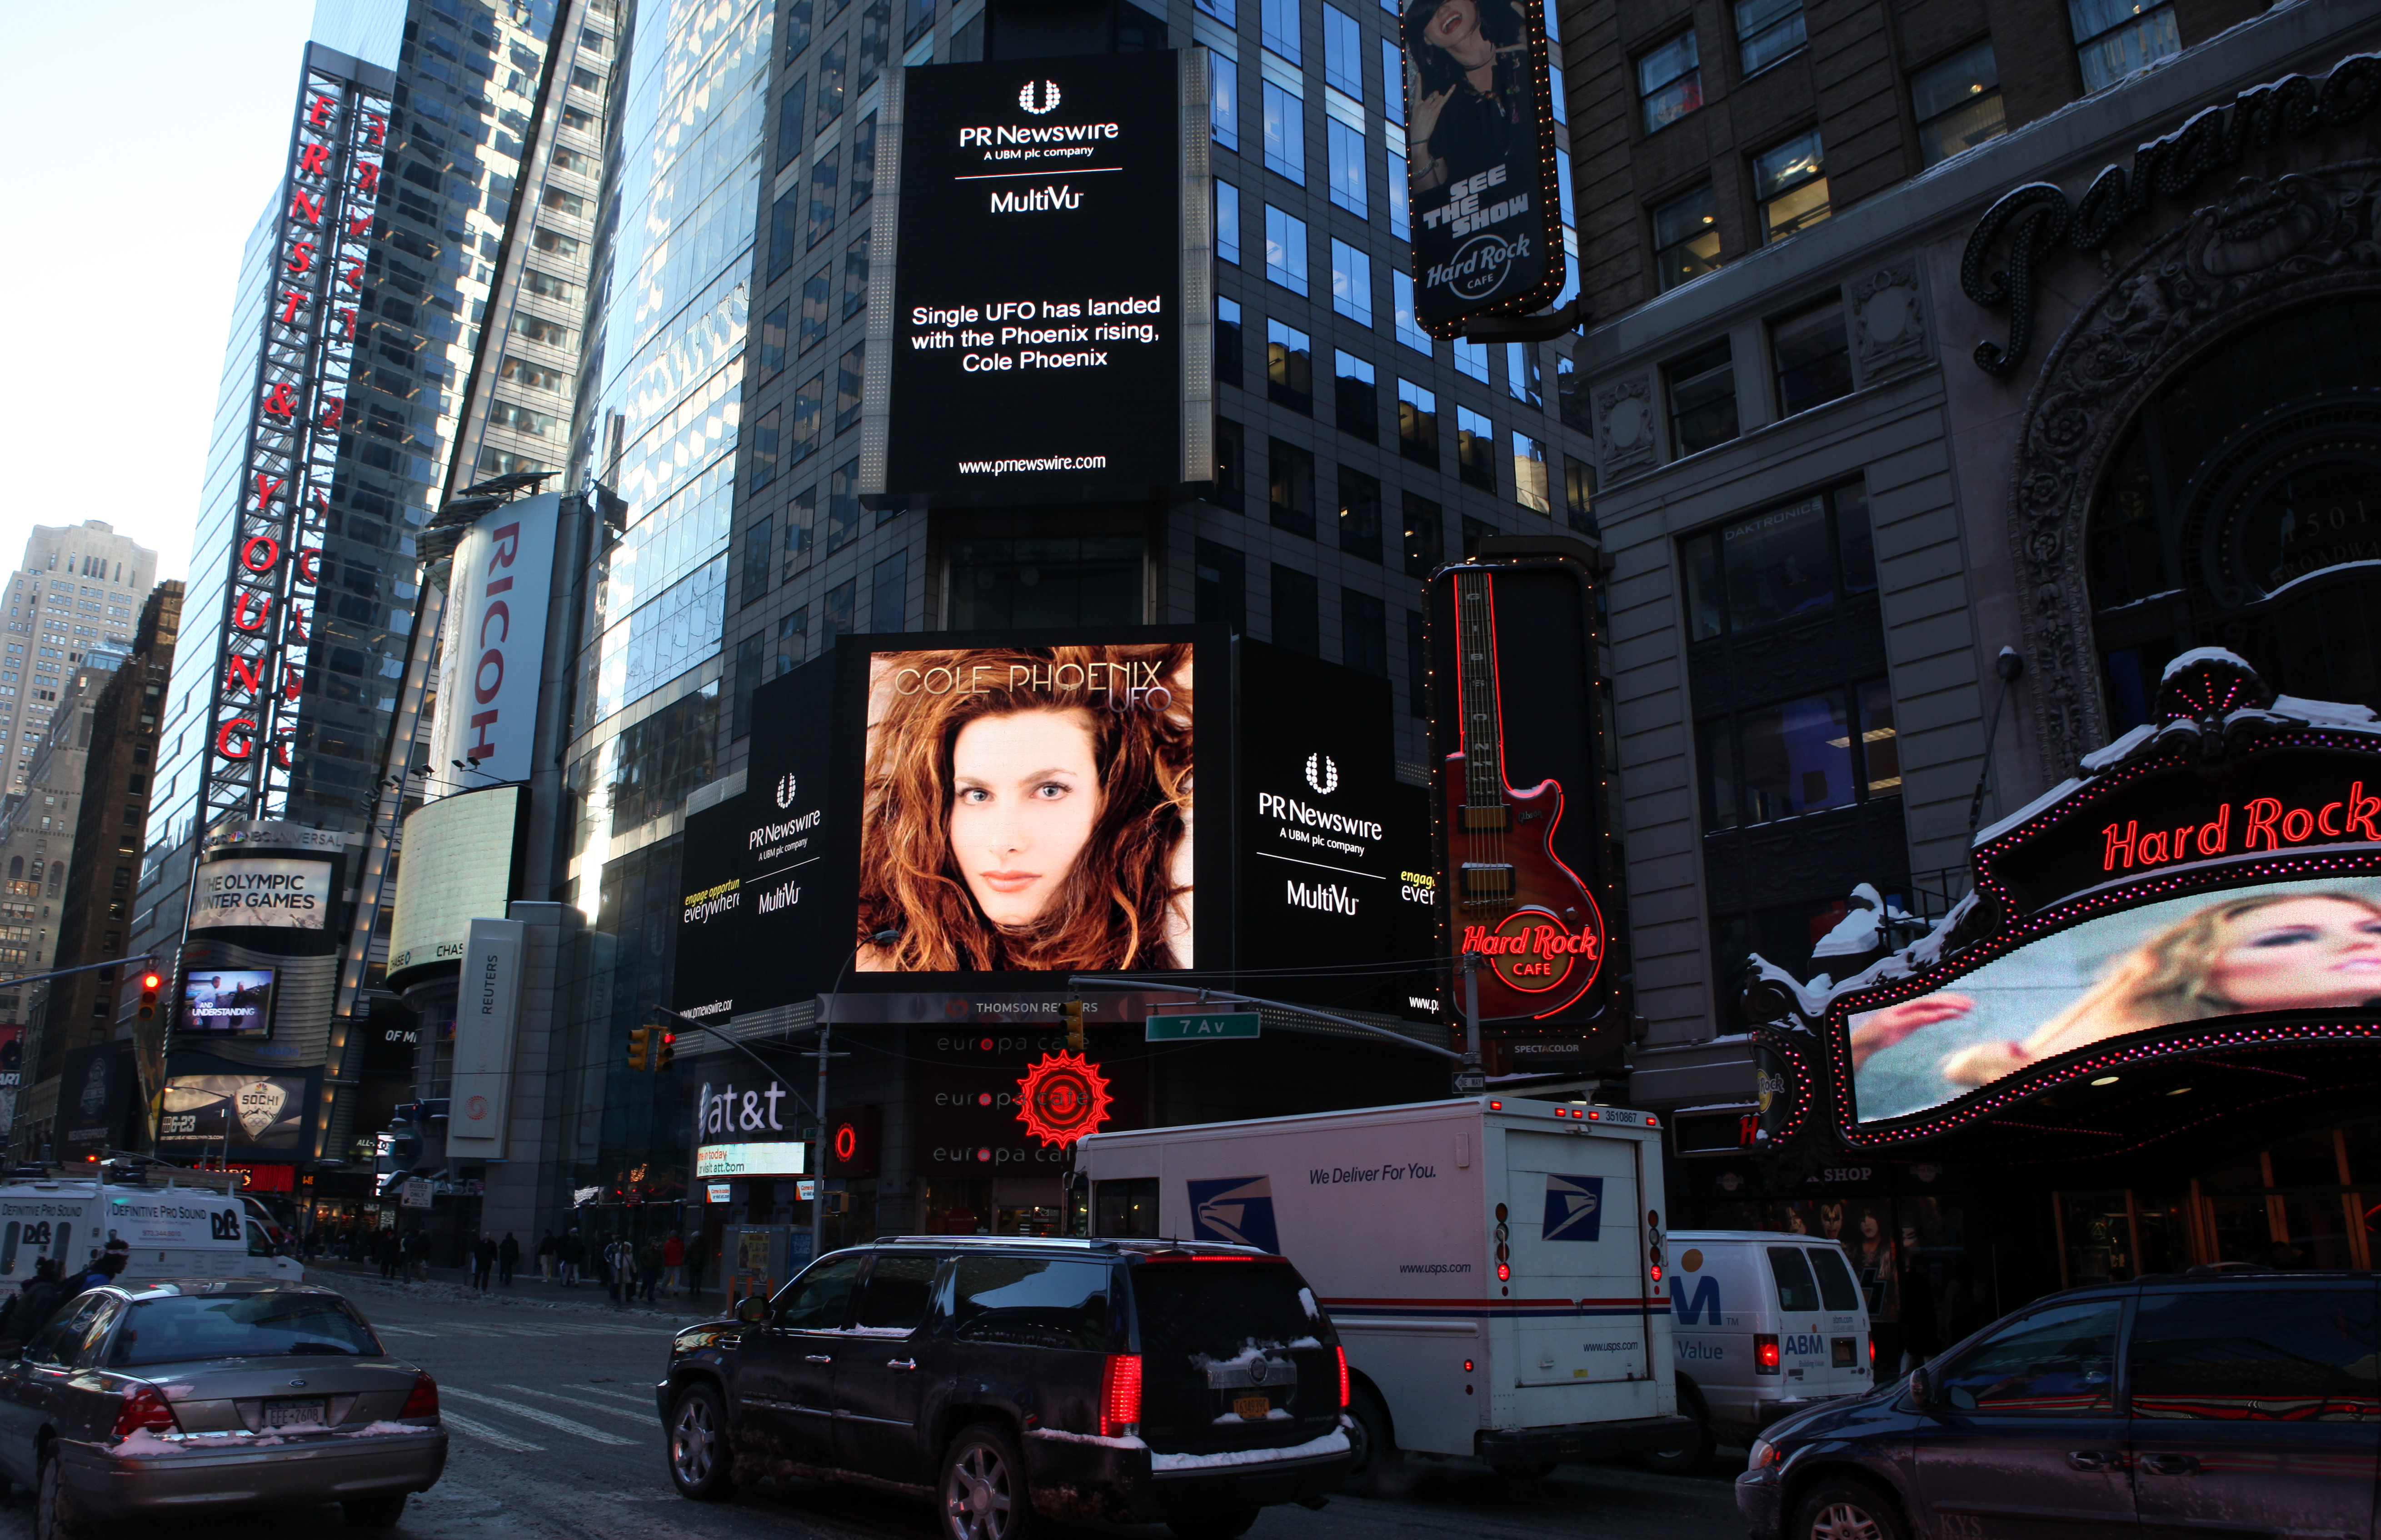 Cole Phoenix's pop single 'UFO' single cover up on billboard in New York Tines Square